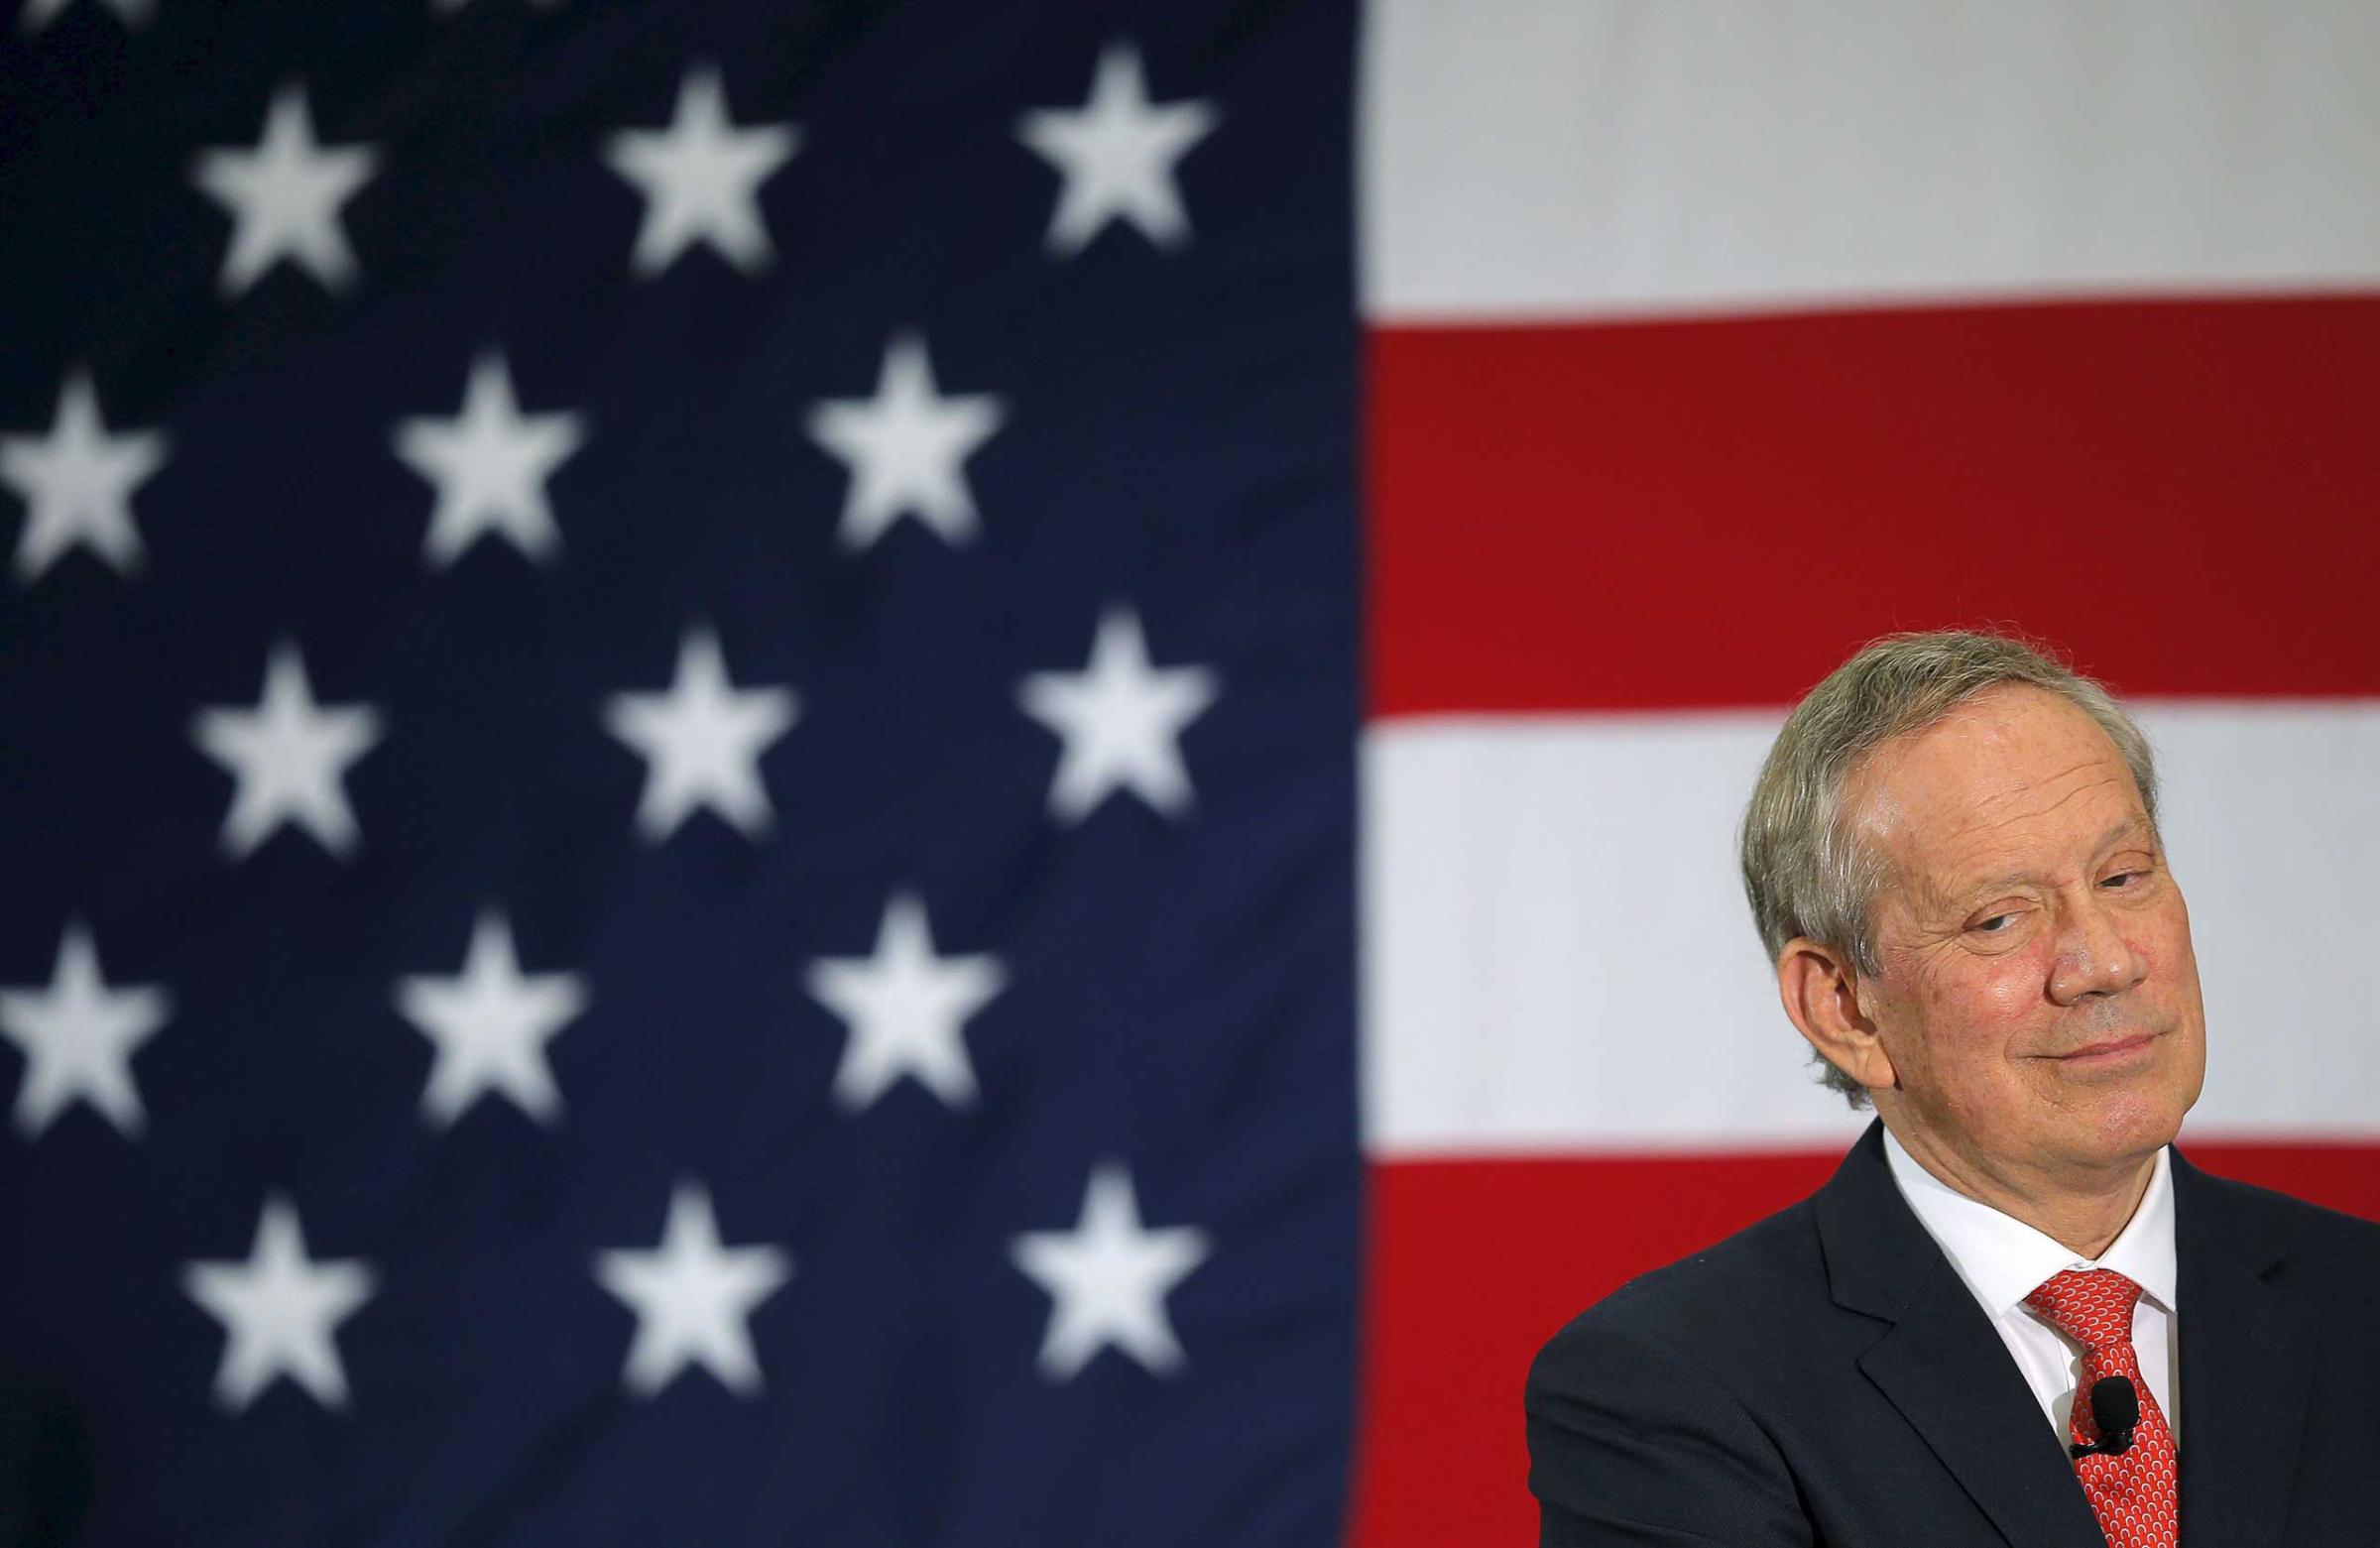 Former New York governor George Pataki listens to a question at the First in the Nation Republican Leadership Conference in Nashua, New Hampshire, in this April 17, 2015 file photo. Pataki on May 28, 2015 entered the race for the 2016 Republican presidential nomination, joining a crowded field of candidates vying to retake the White House for their party. REUTERS/Brian Snyder/Files